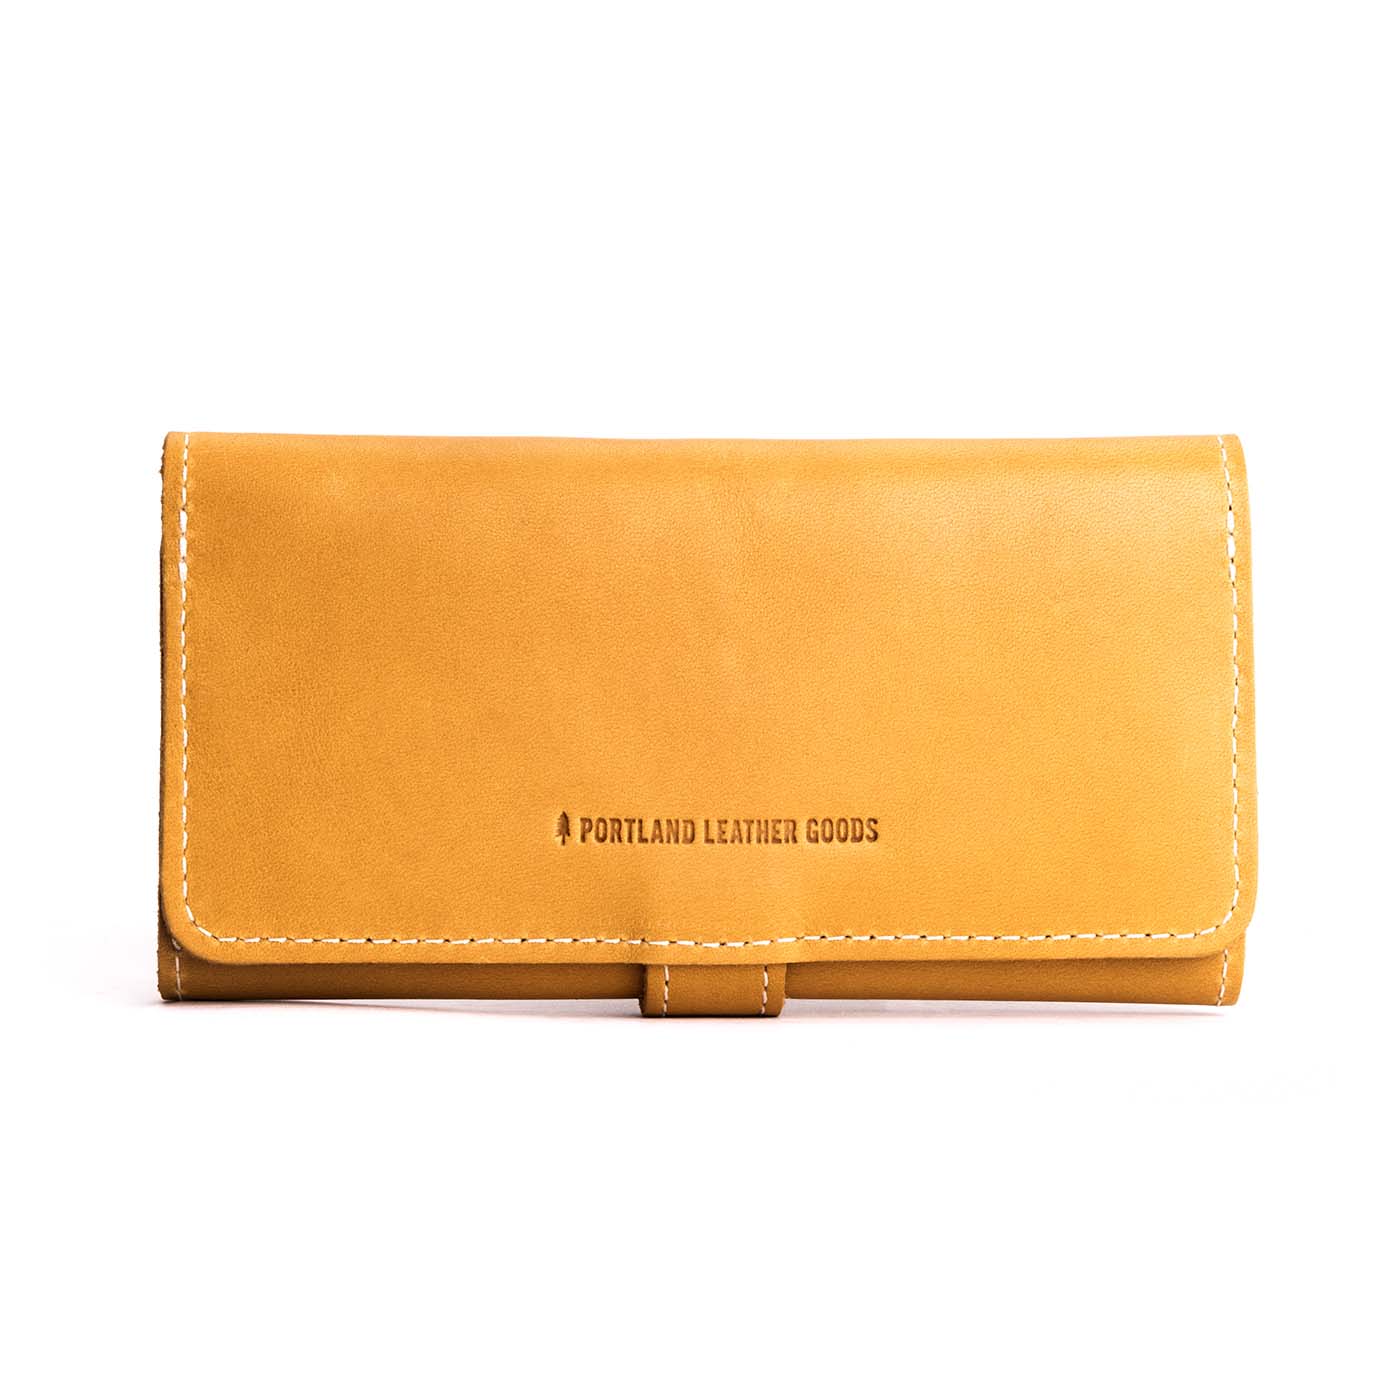 Heavy leather trifold wallet, double stitching Best seller!